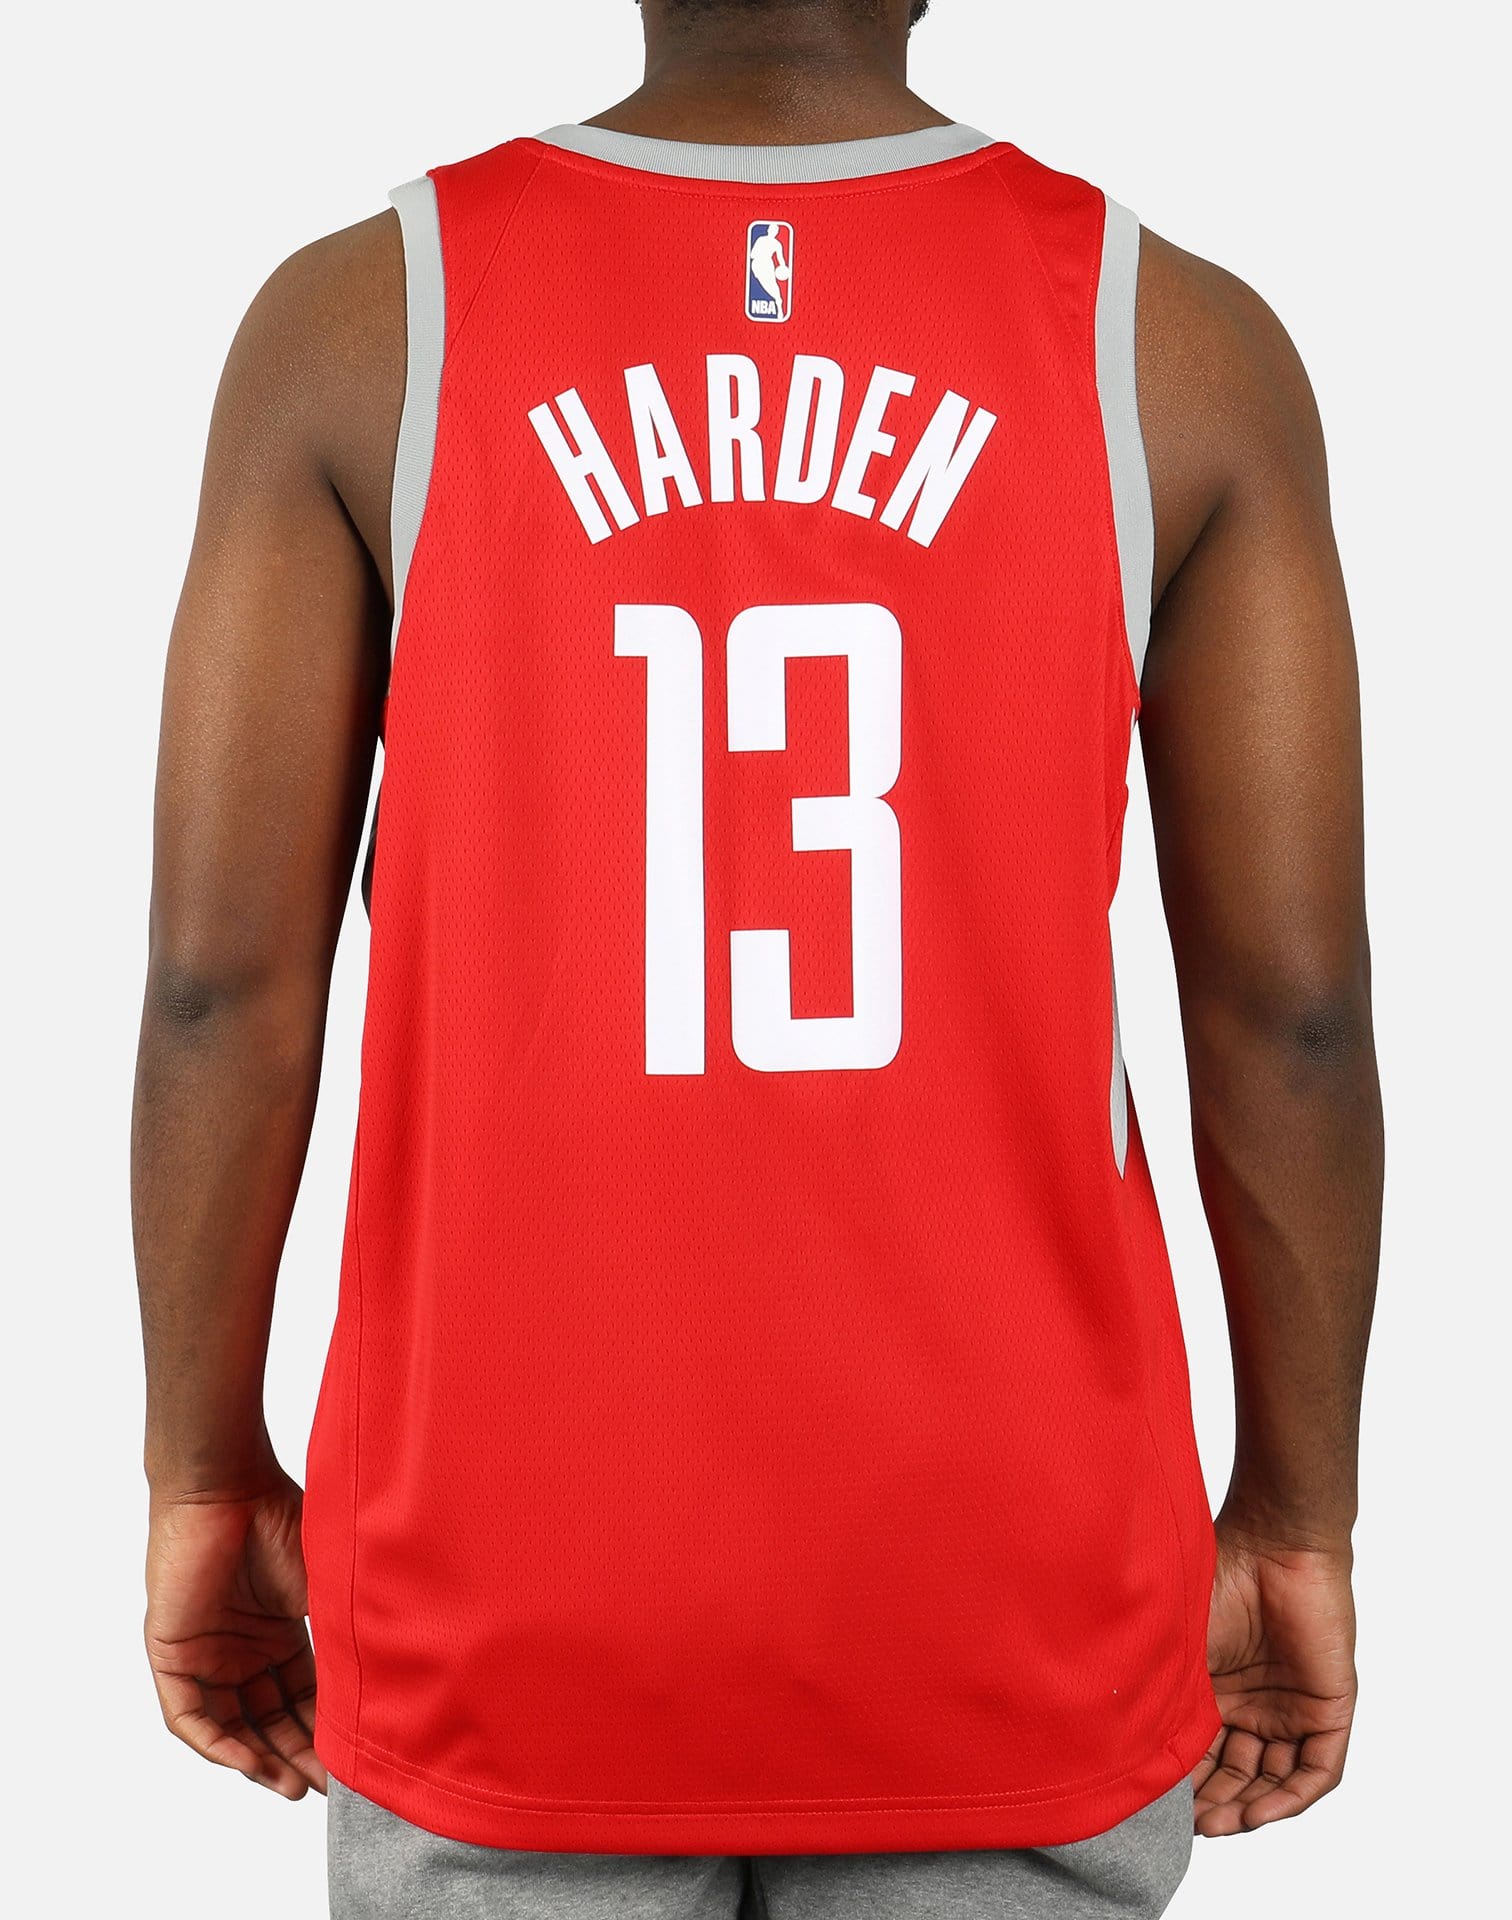 Houston Rockets - 🚀 2021-22 Rockets City Jersey 🚀 🏀 Pre Order NOW and  receive two tickets to the November 29th Thunder at Rockets game! 🛒  bit.ly/2021CityJersey